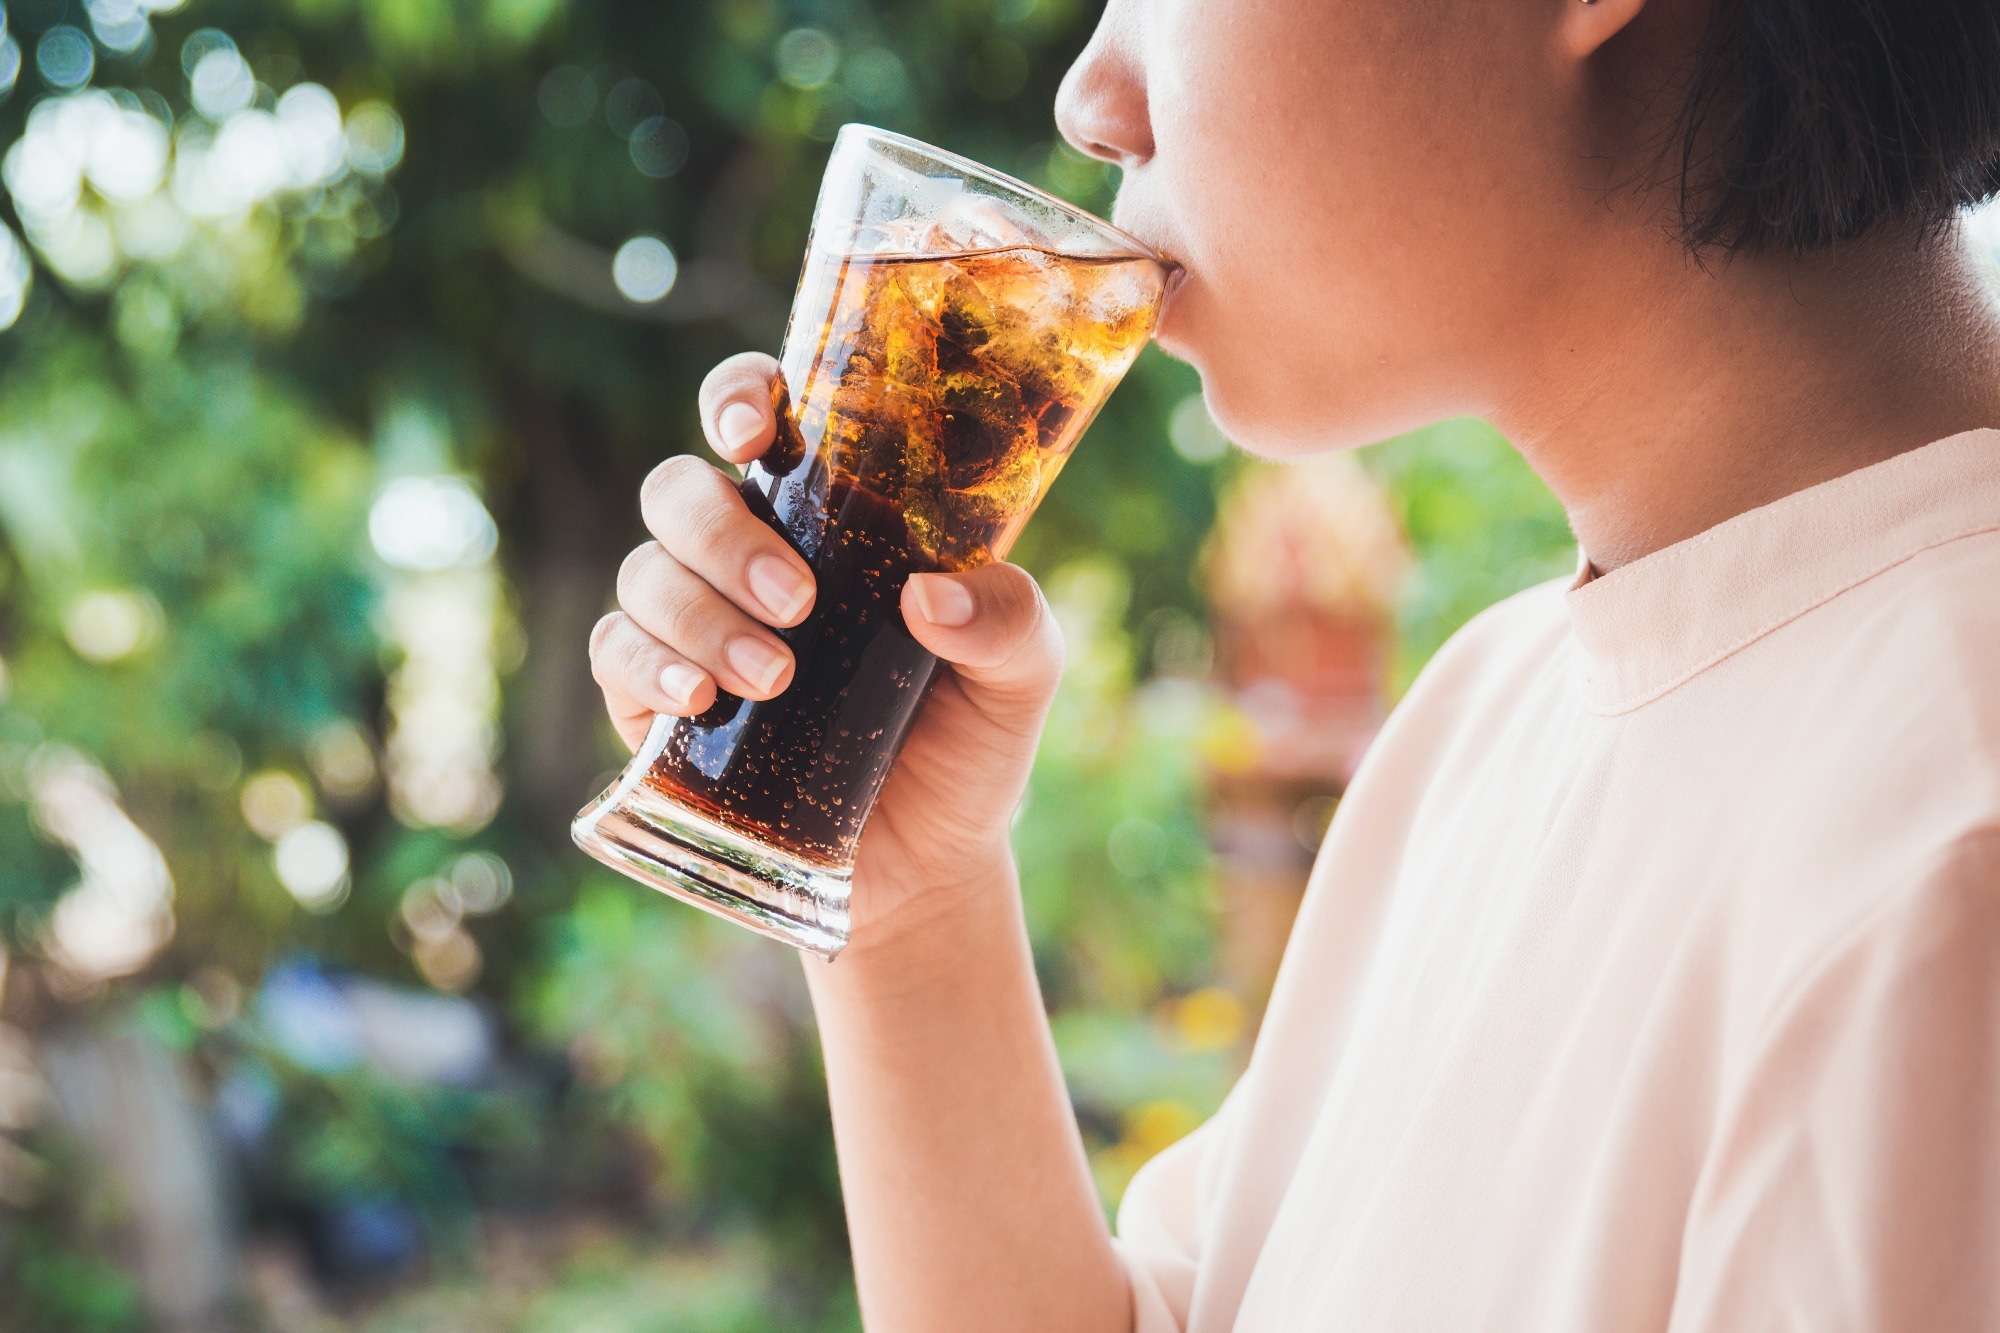 Study: Beverage consumption and mortality among adults with type 2 diabetes: prospective cohort study. Image Credit: nednapa / Shutterstock.com